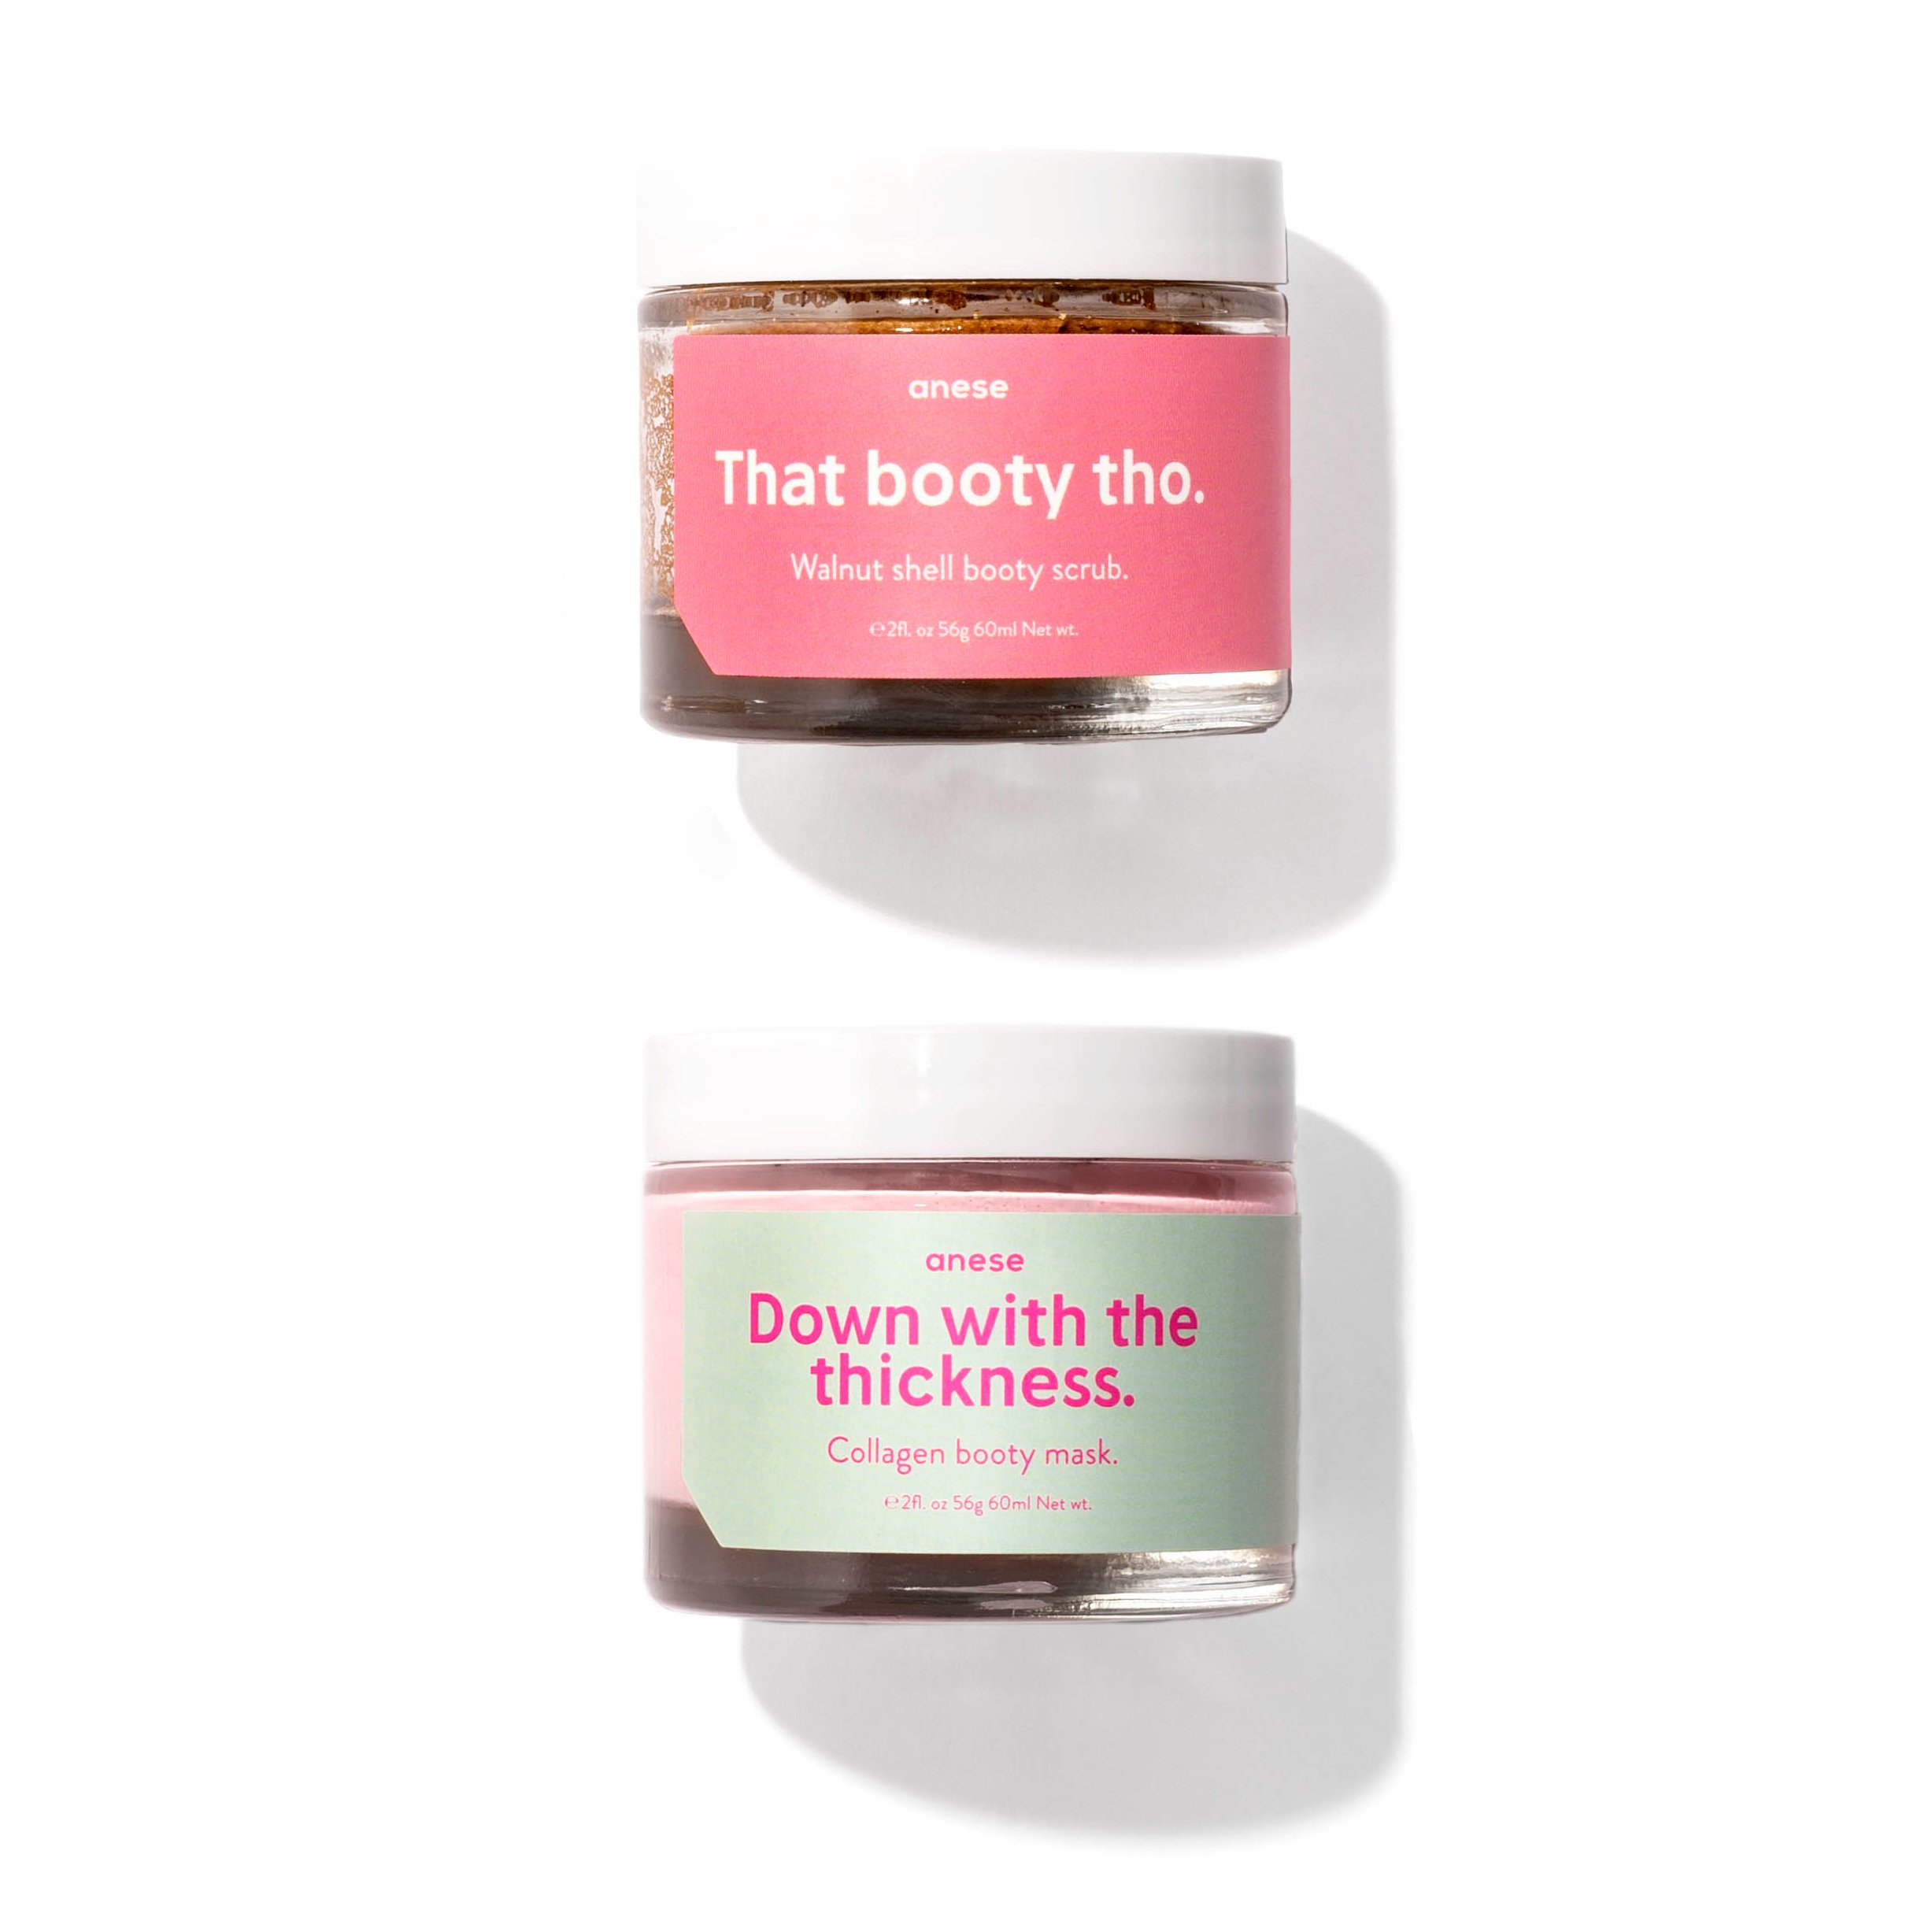 Booty Duo - Save $5!